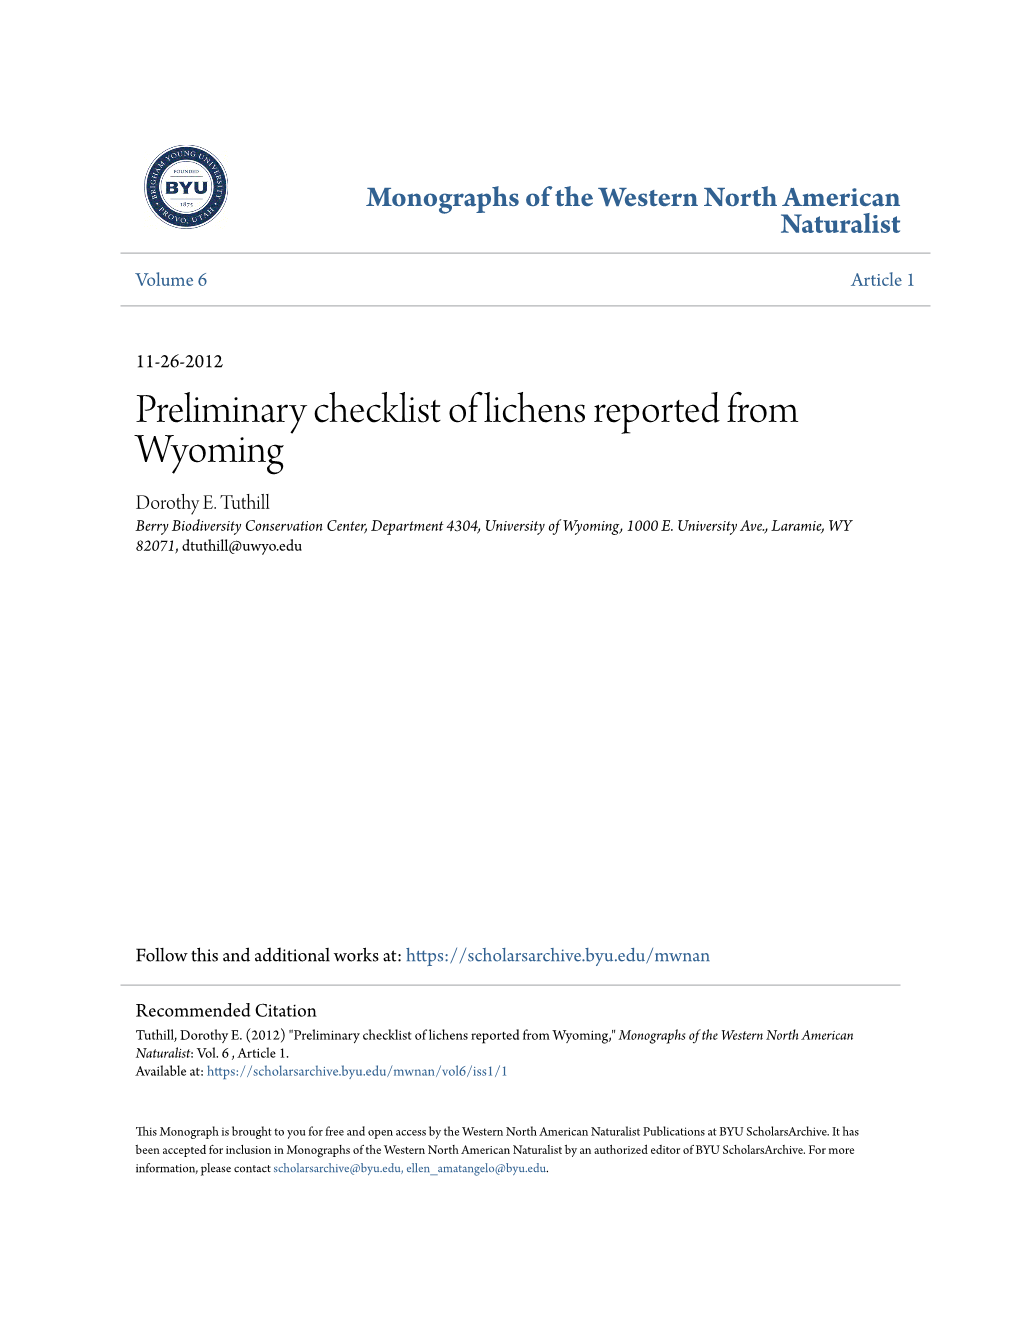 Preliminary Checklist of Lichens Reported from Wyoming Dorothy E